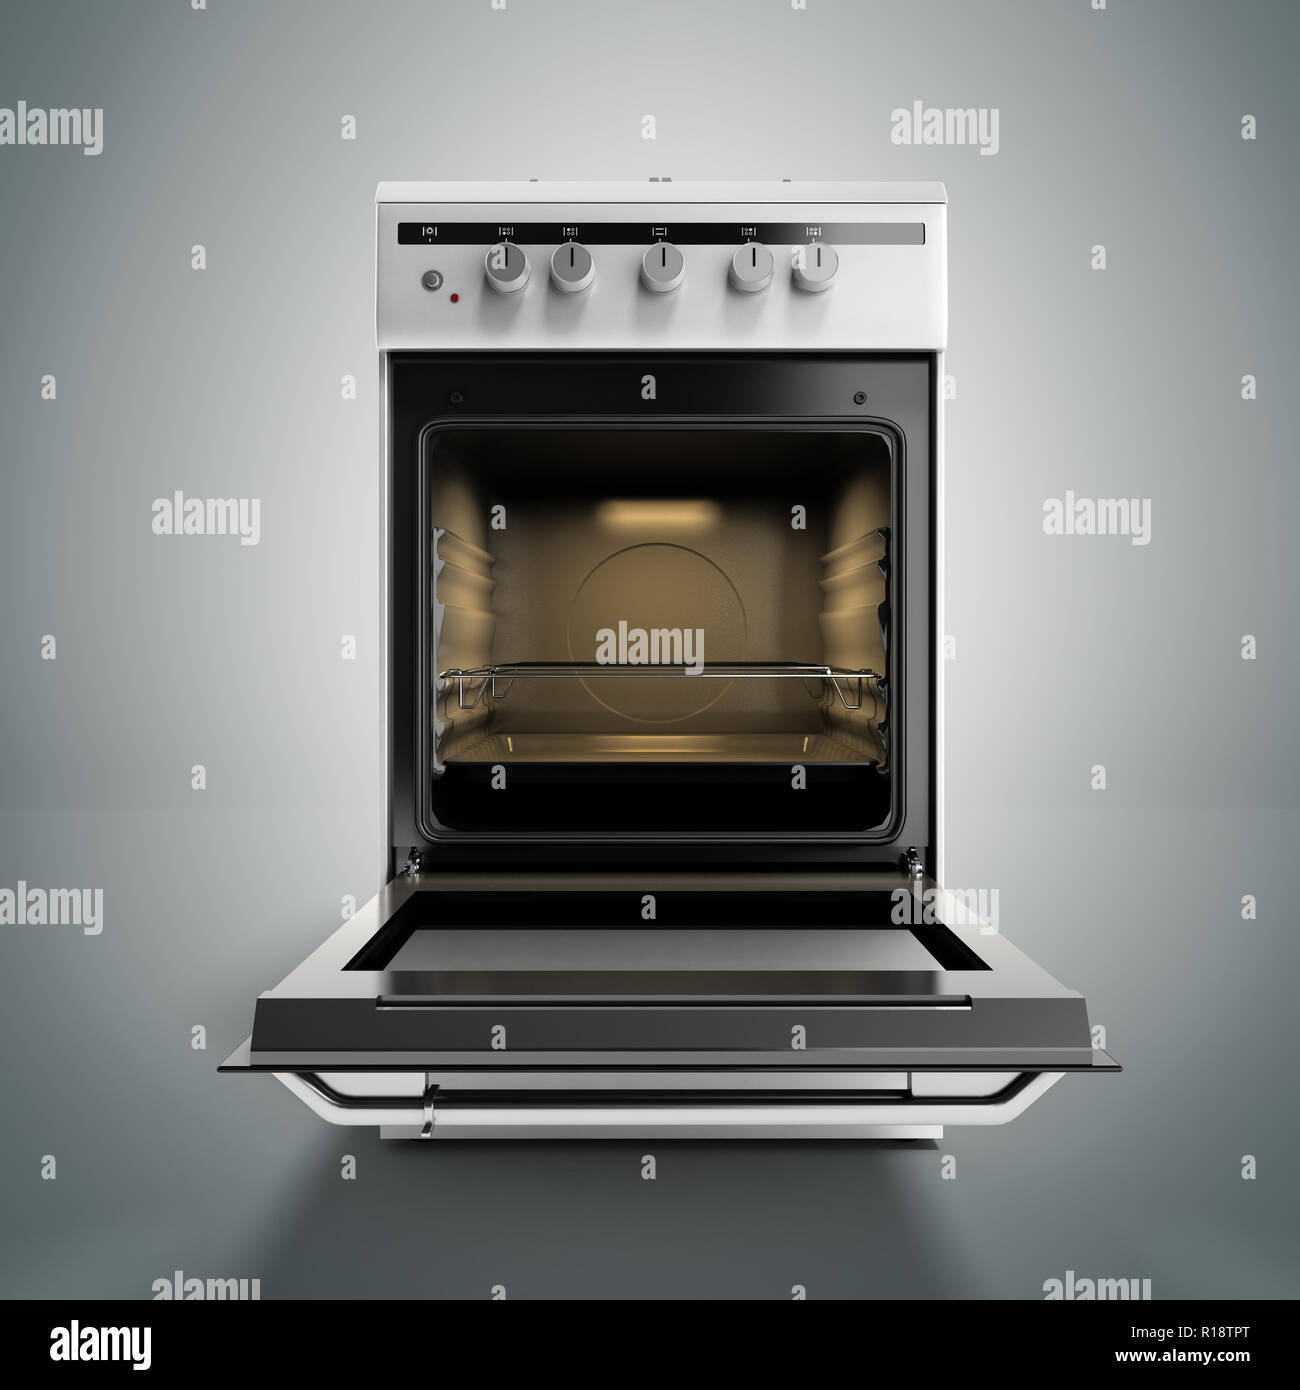 open gas stove 3d render isolated on a grey background Stock Photo